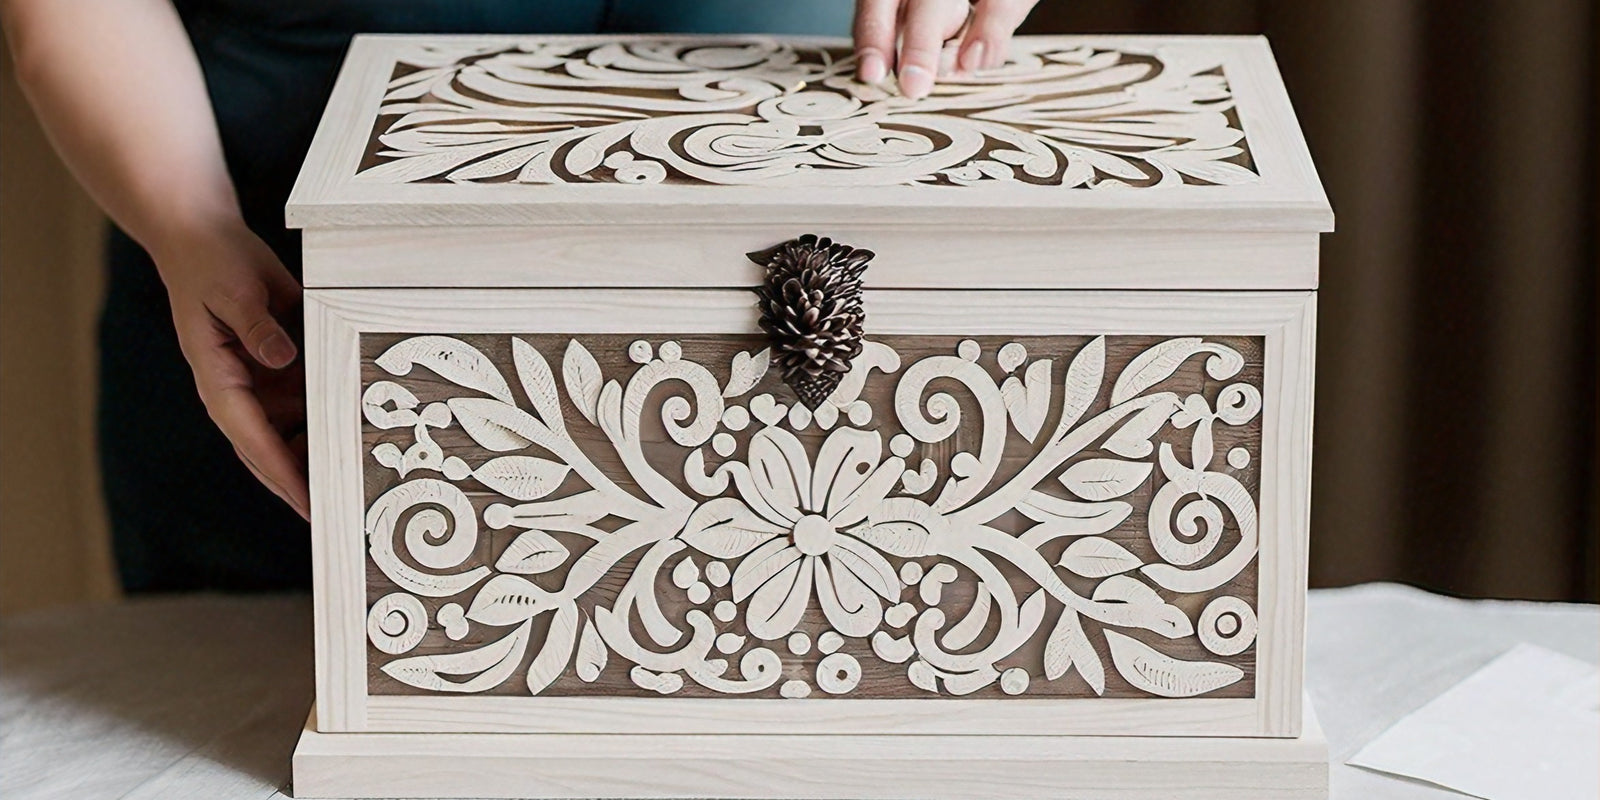 Unique DIY Wedding Card Box Designs to Add a Personalized Touch to Your Big Day